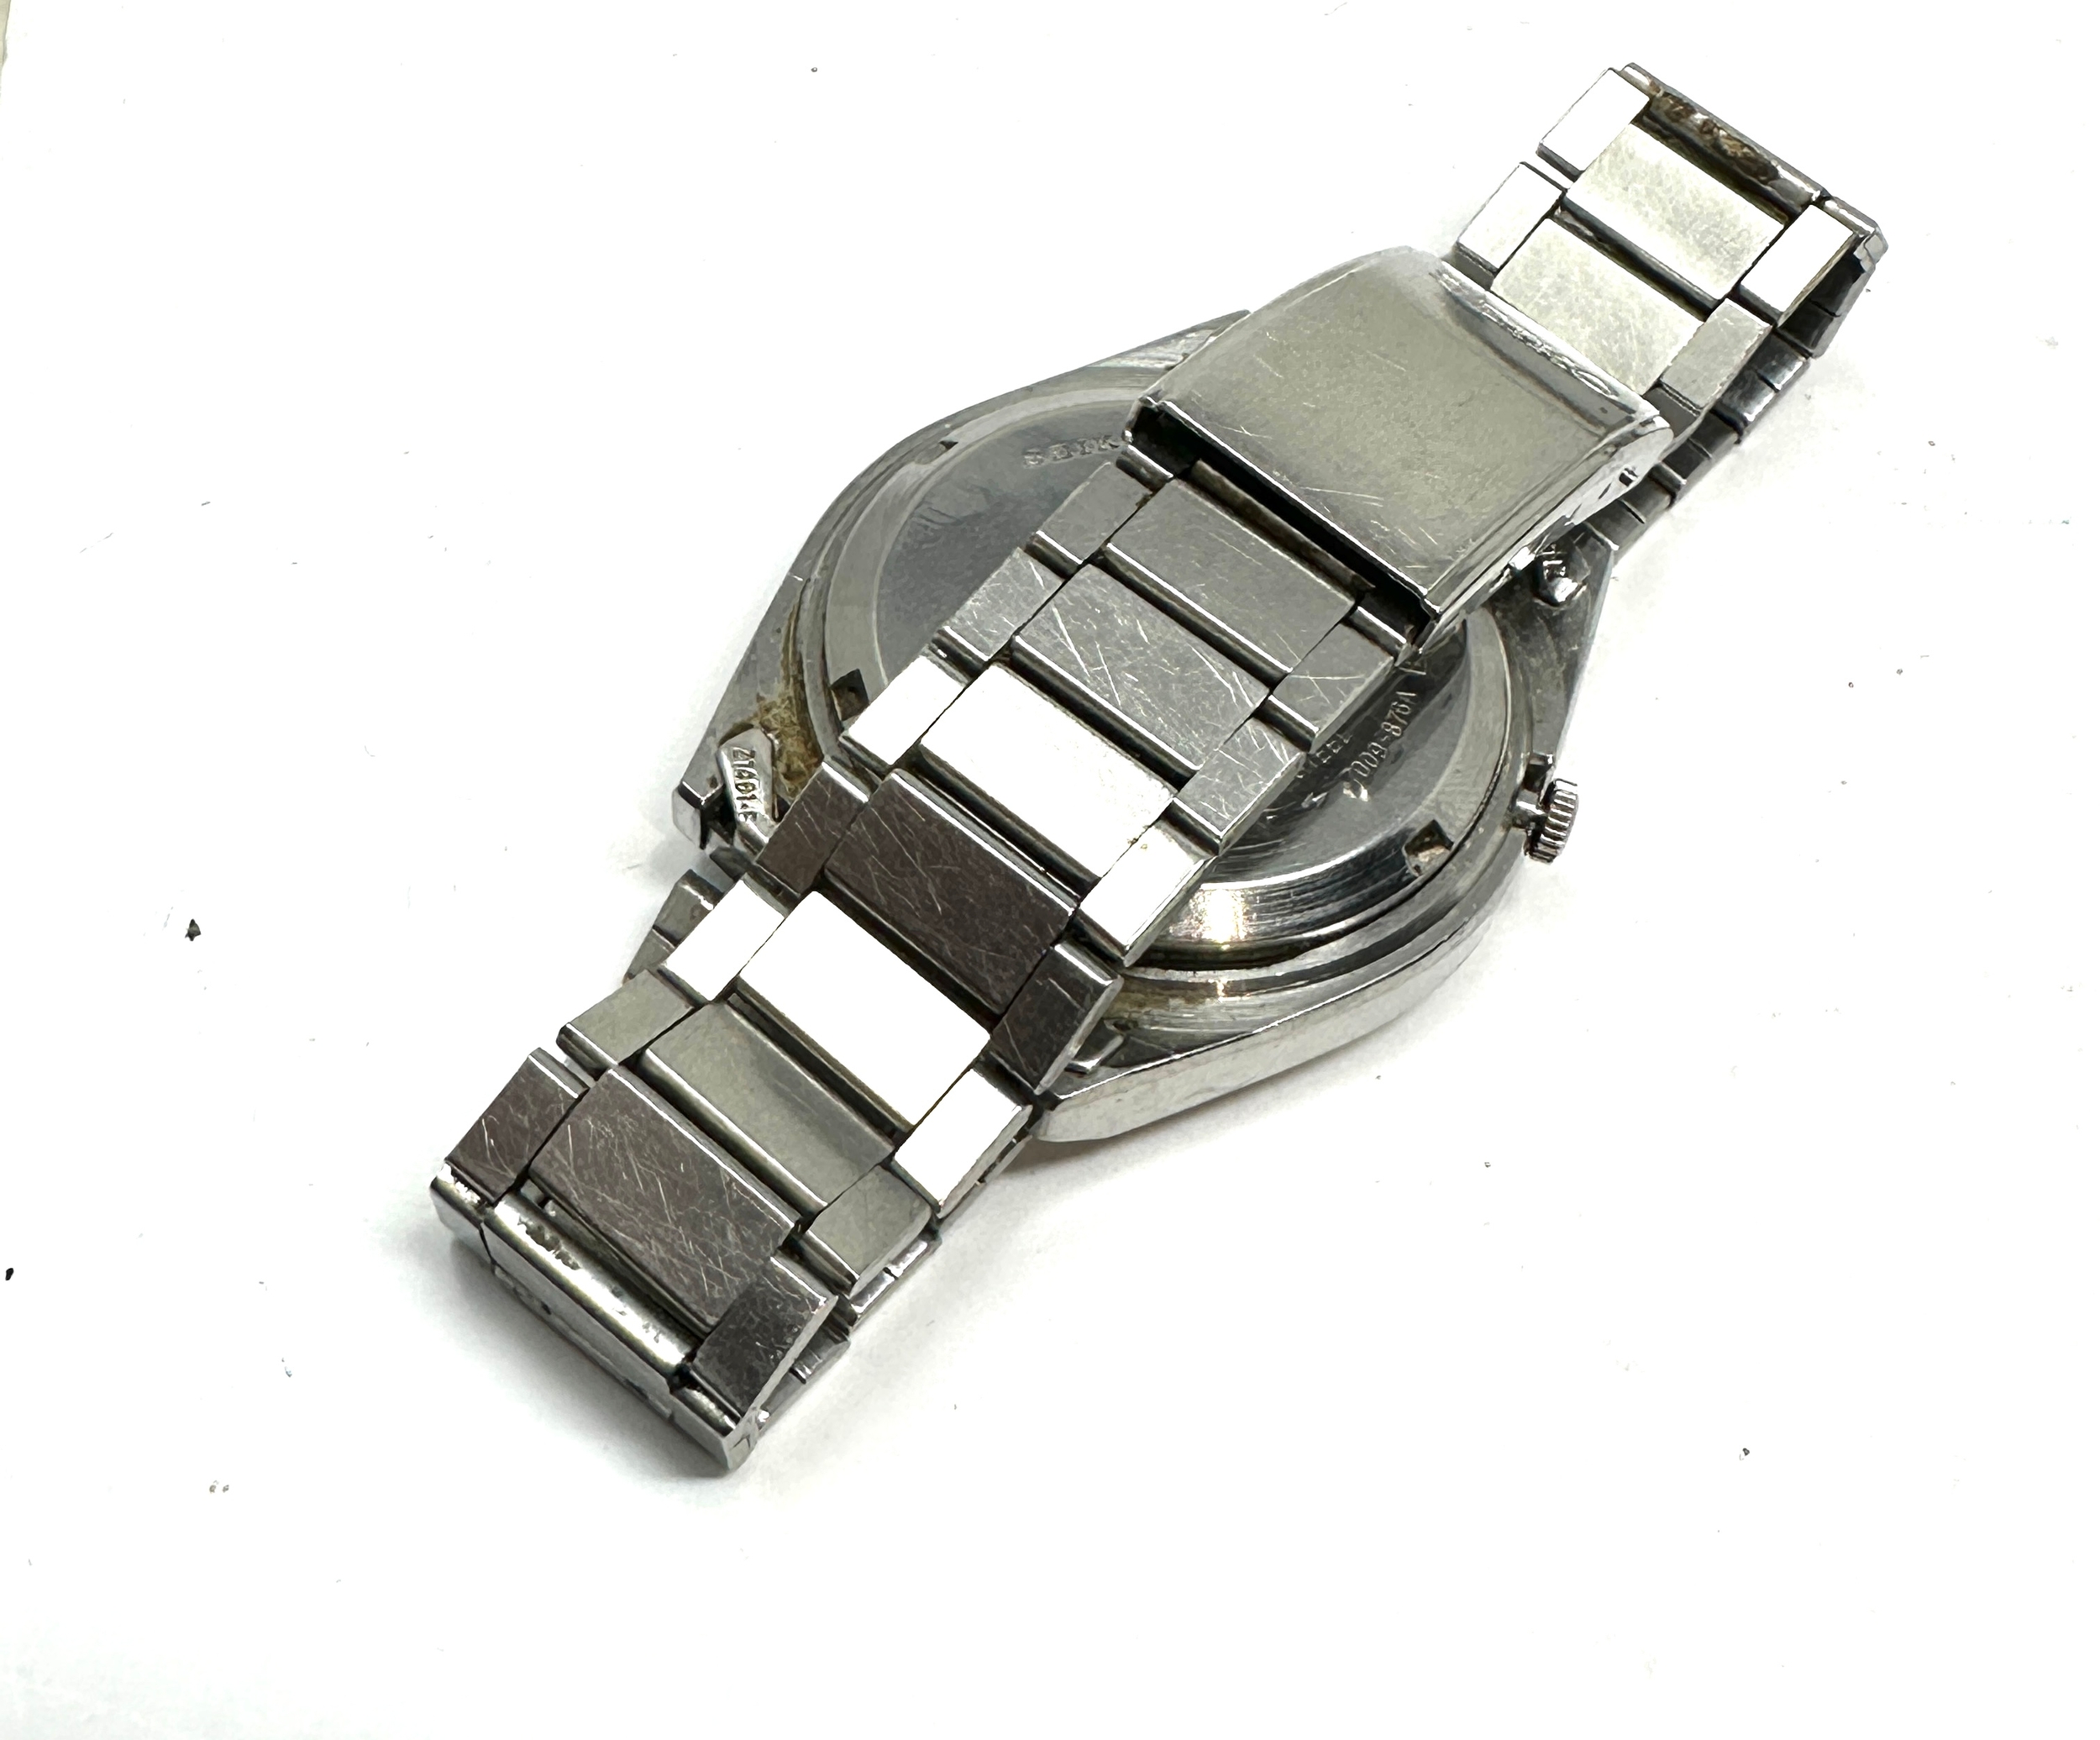 Vintage seiko 5 automatic day date gents wristwatch 7009-876a the watch is ticking - Image 3 of 4